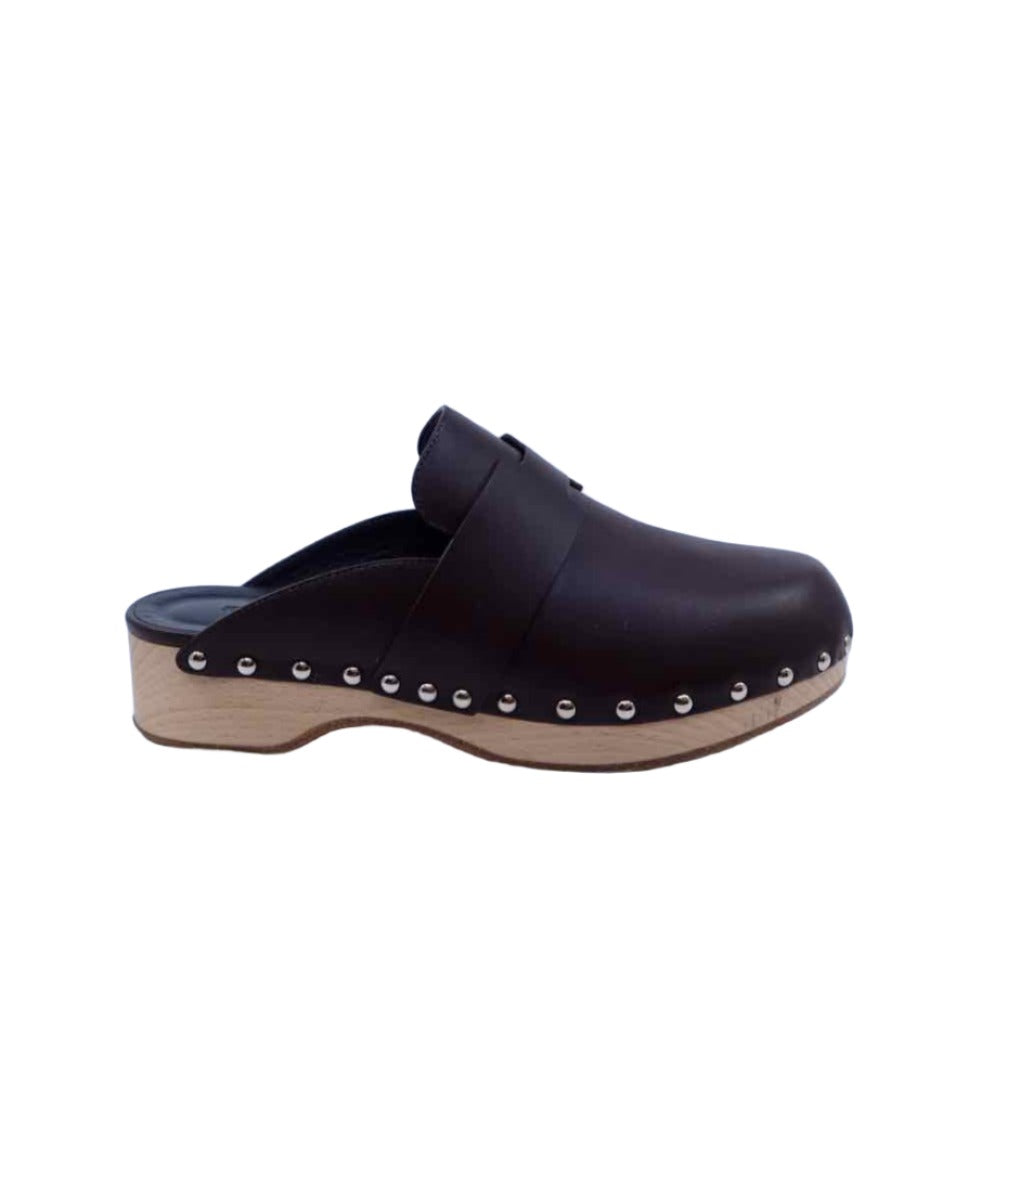 HERMES | Brown Leather Clogs | Size 8